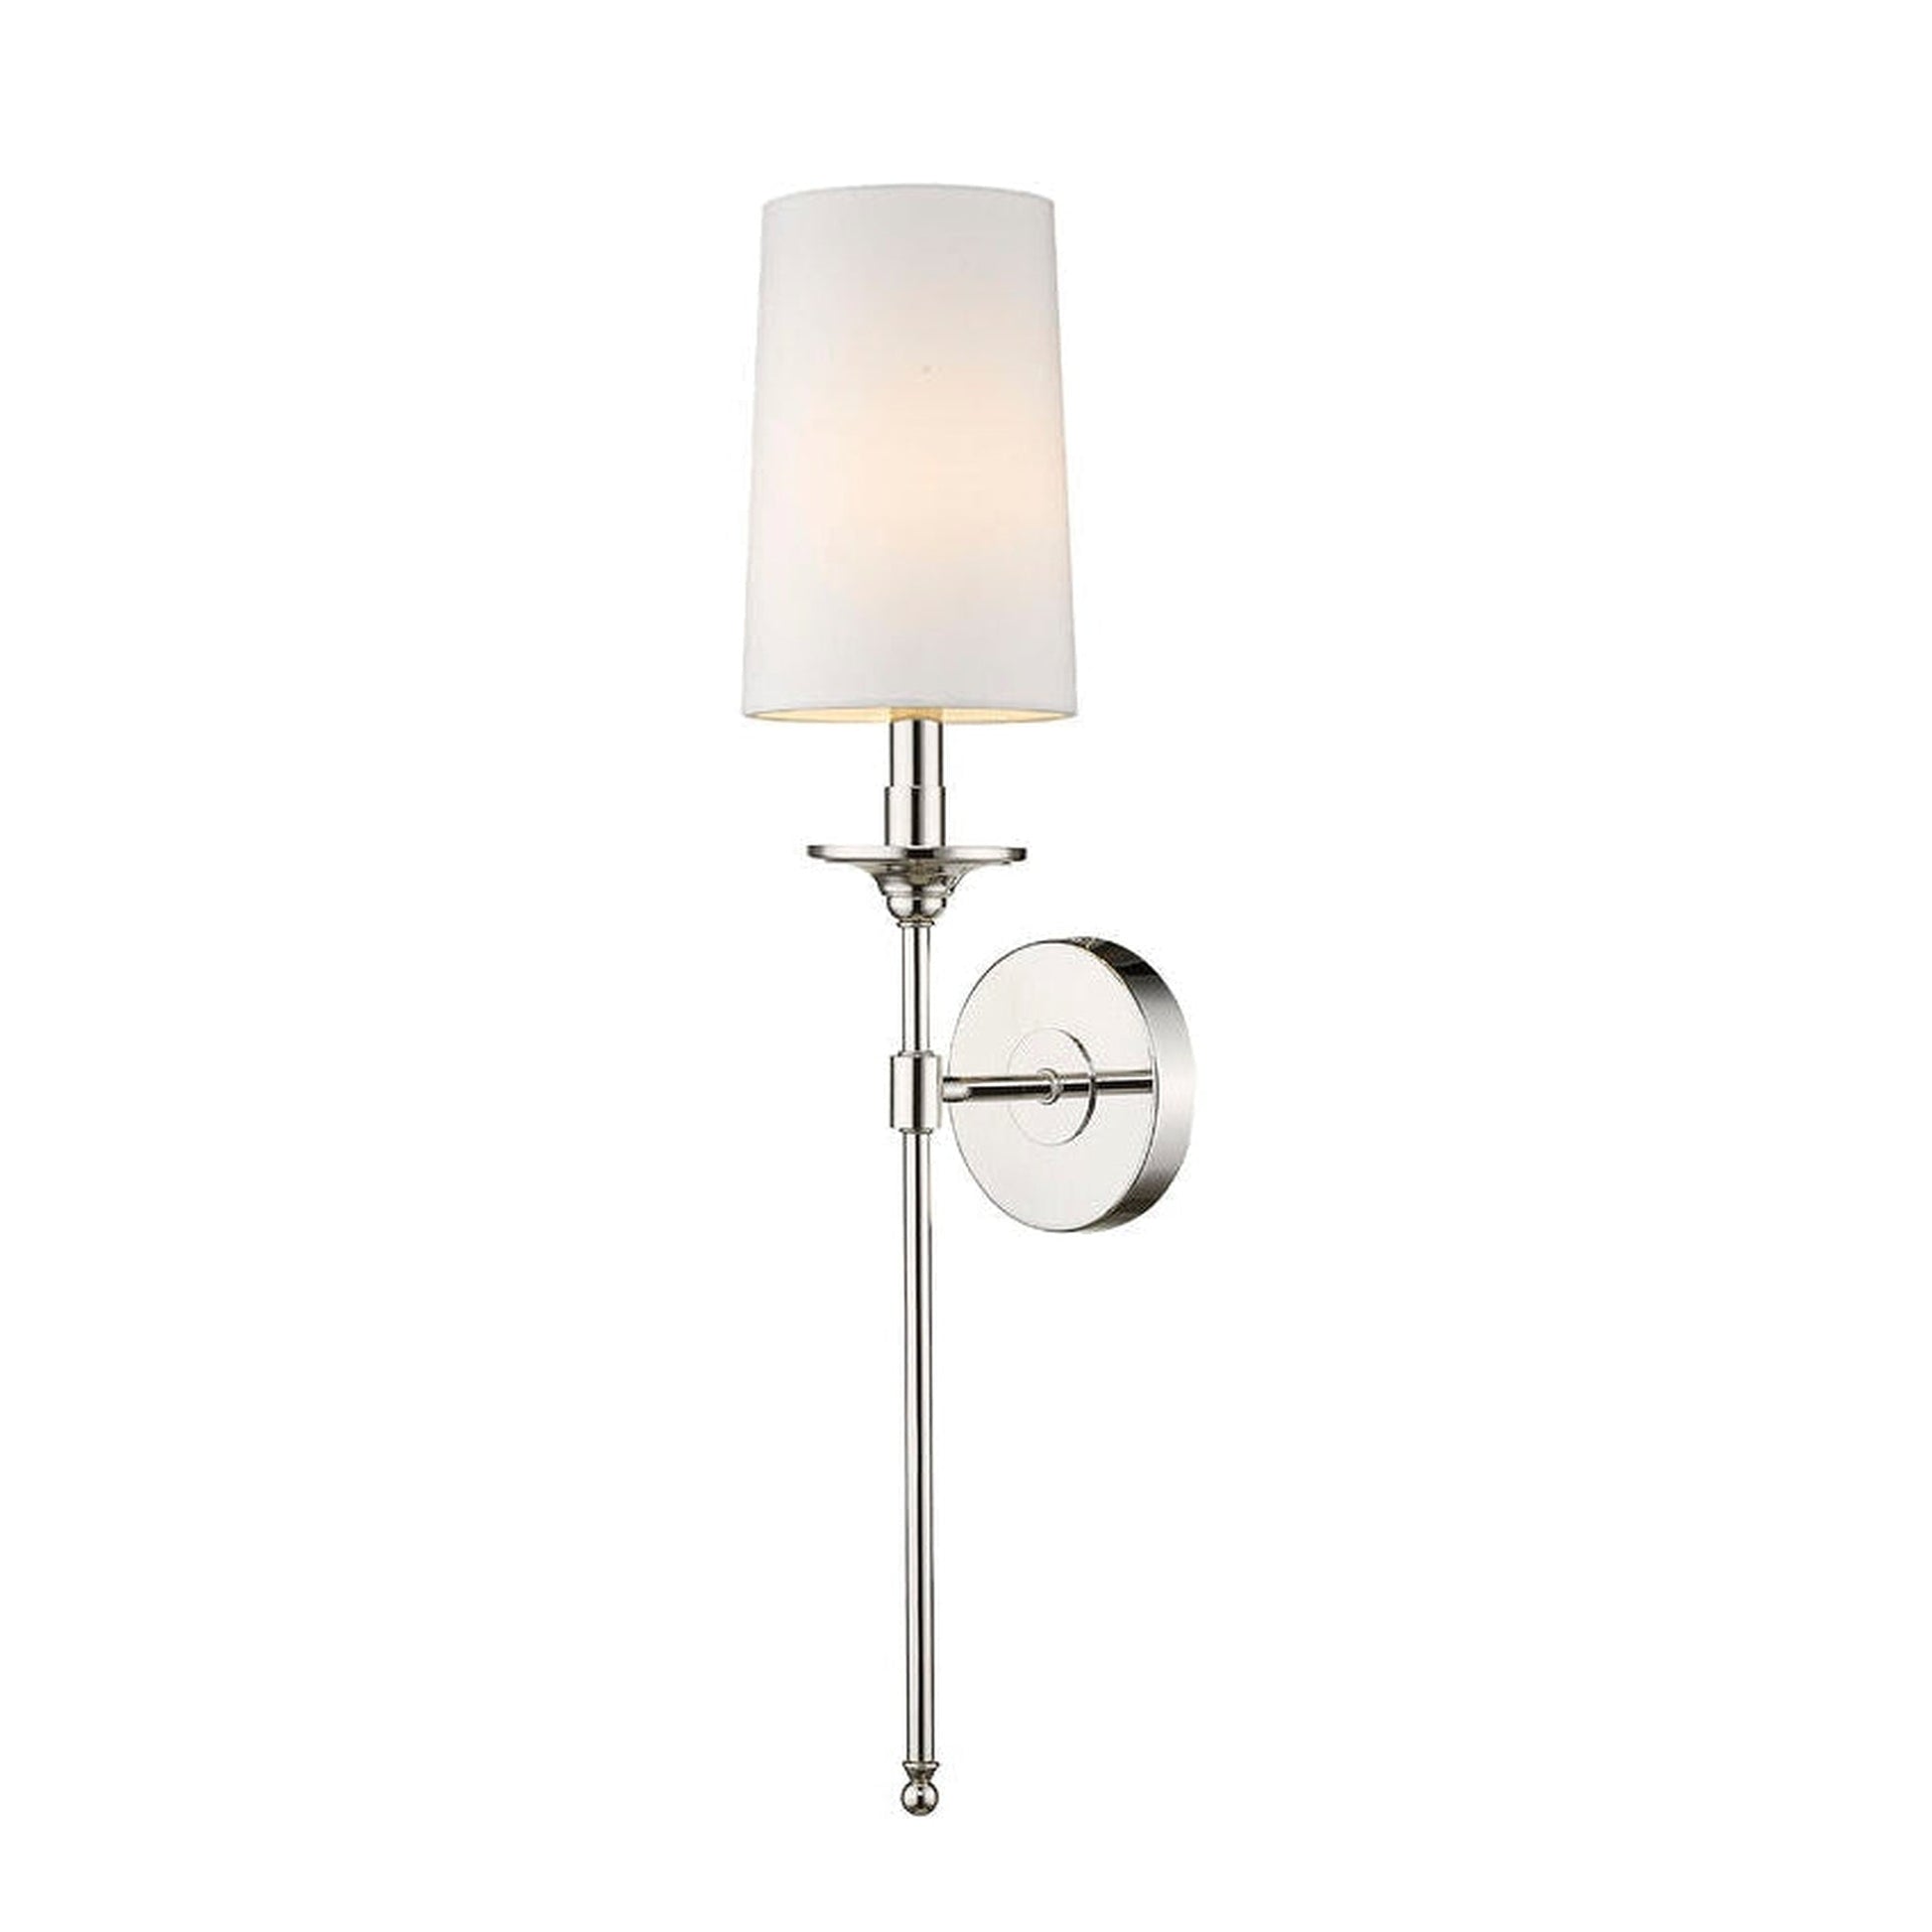 Z-Lite Emily 6" 1-Light Polished Nickel Wall Sconce With White Fabric Shade